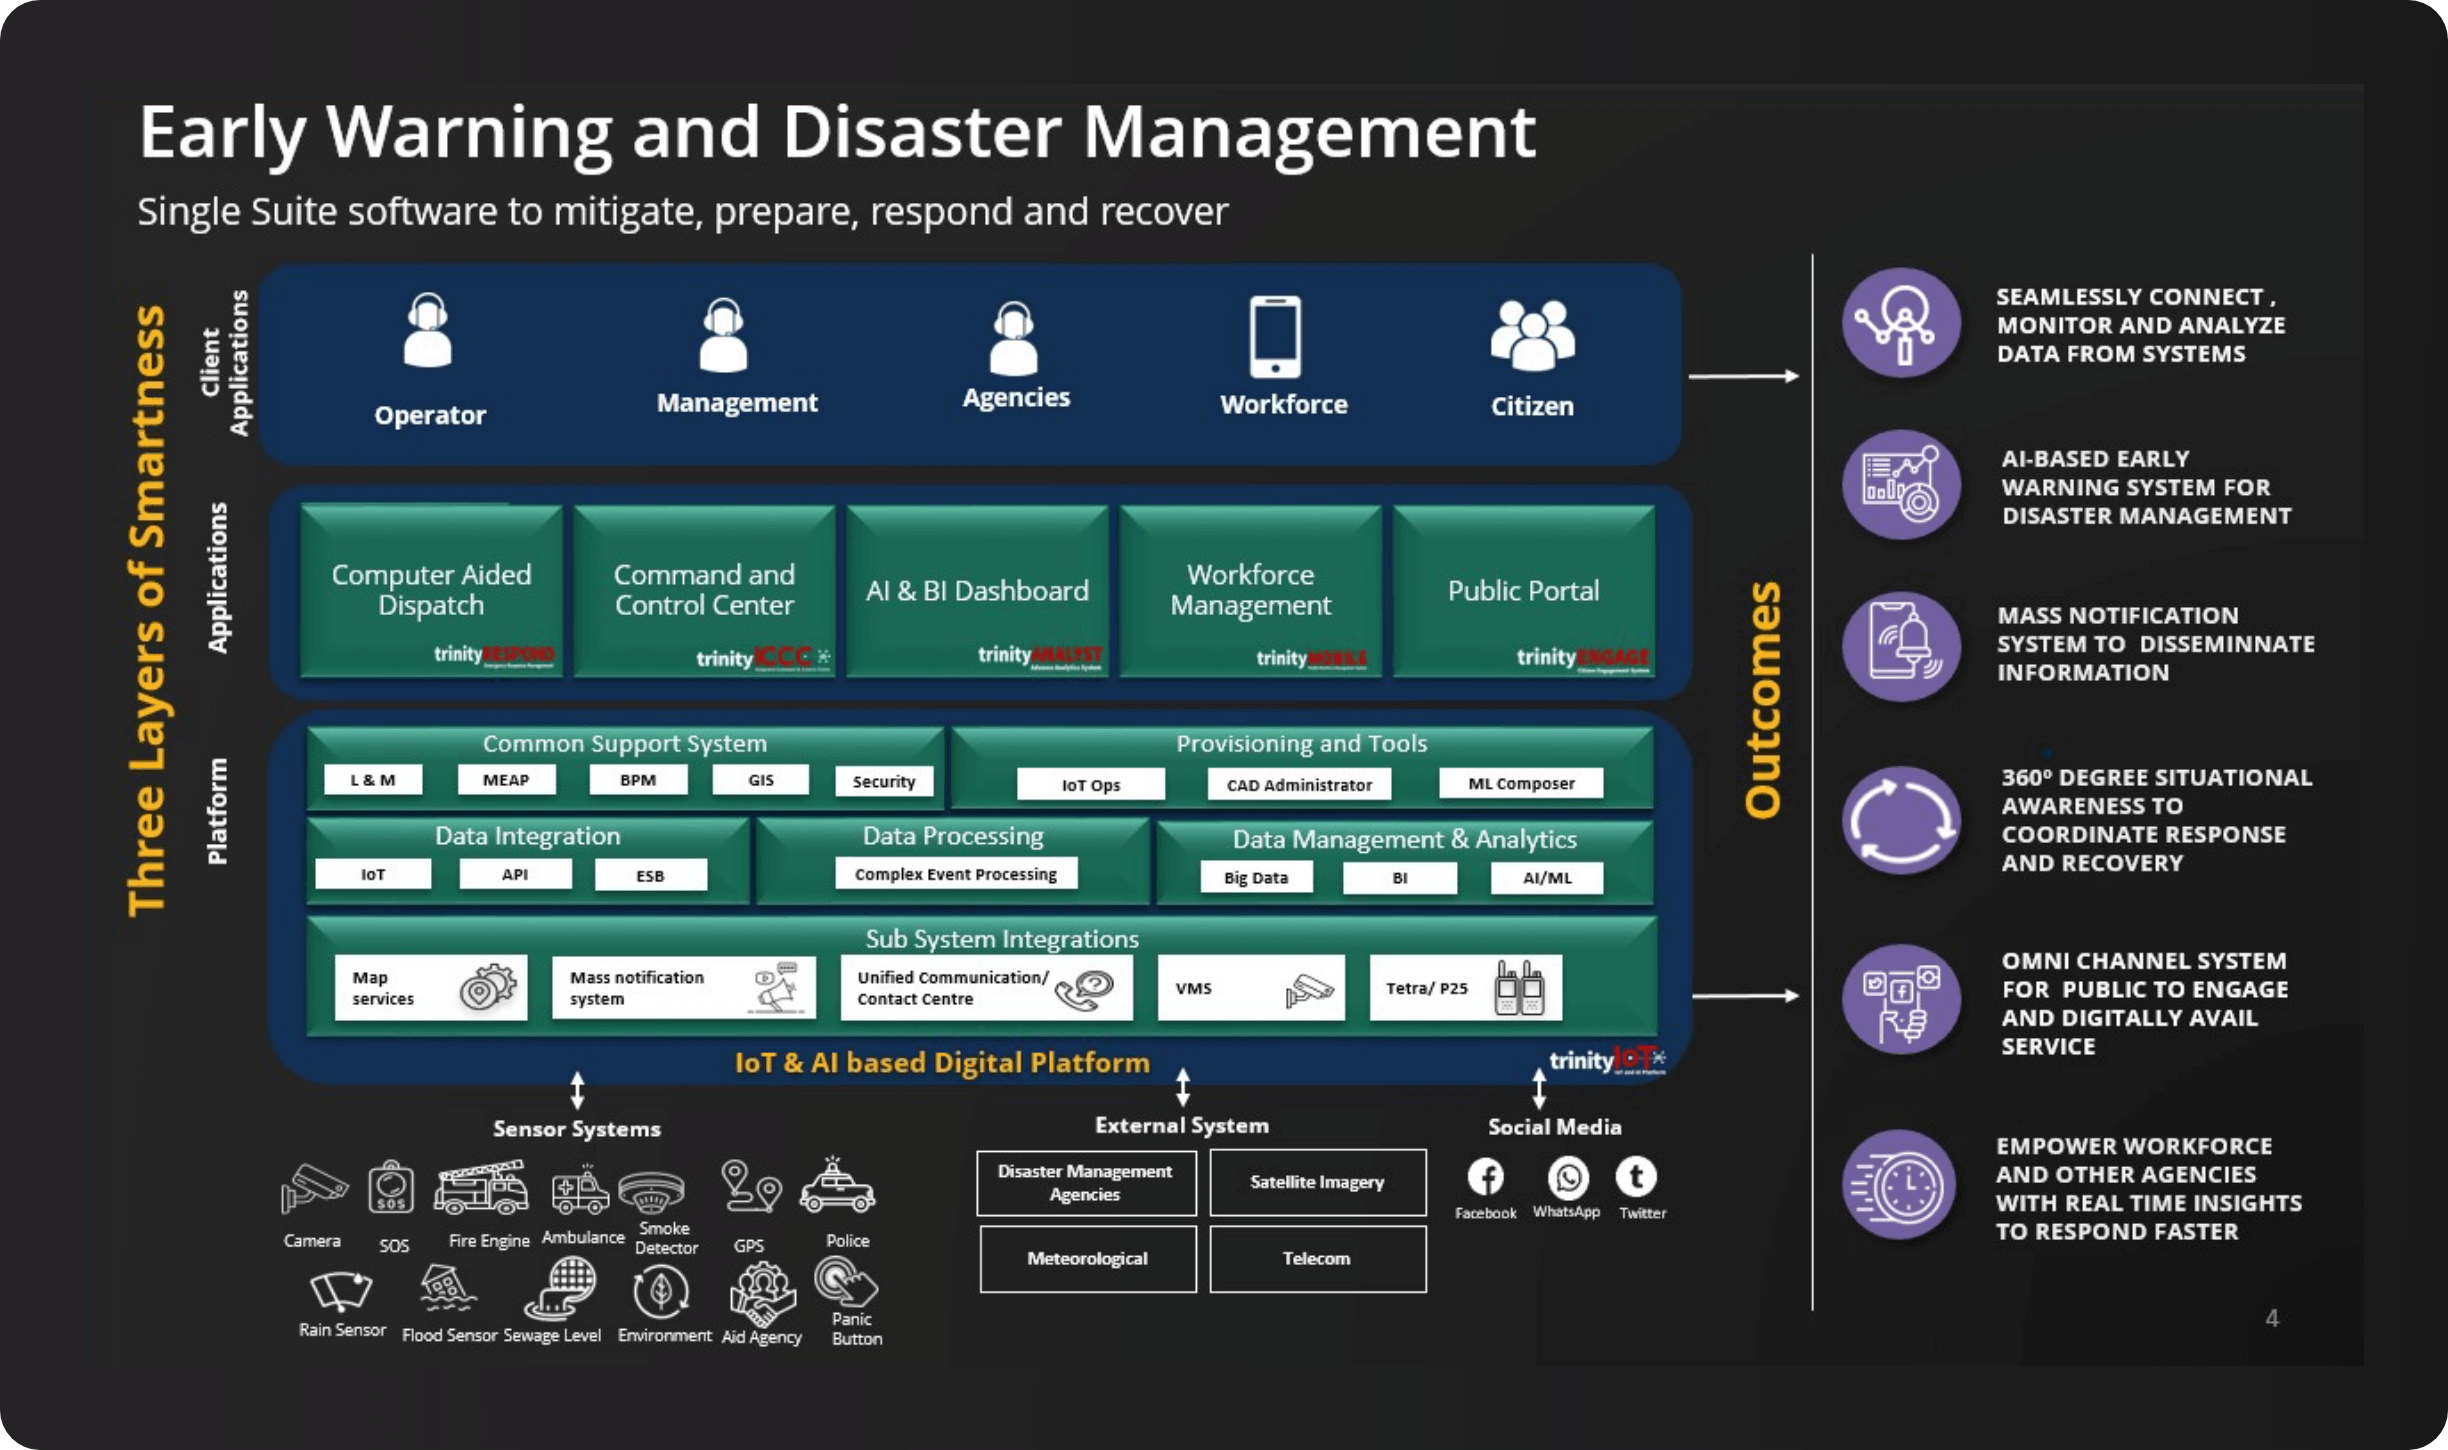 early warning and disaster management architecture